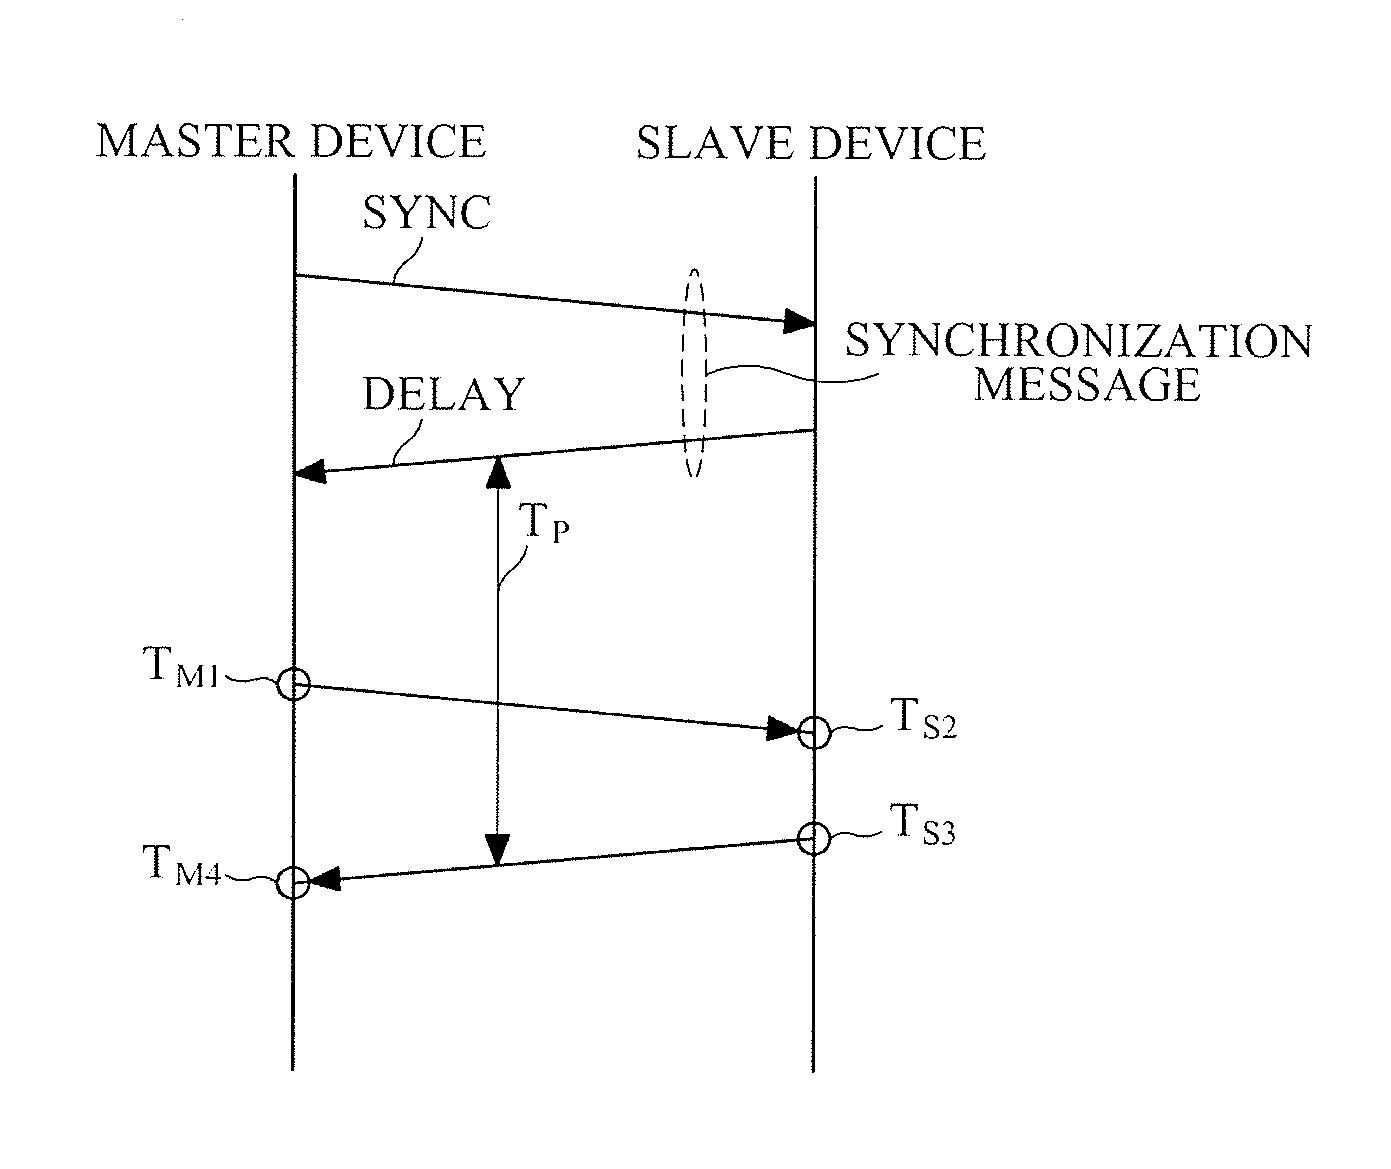 Time synchronization apparatus based on parallel processing